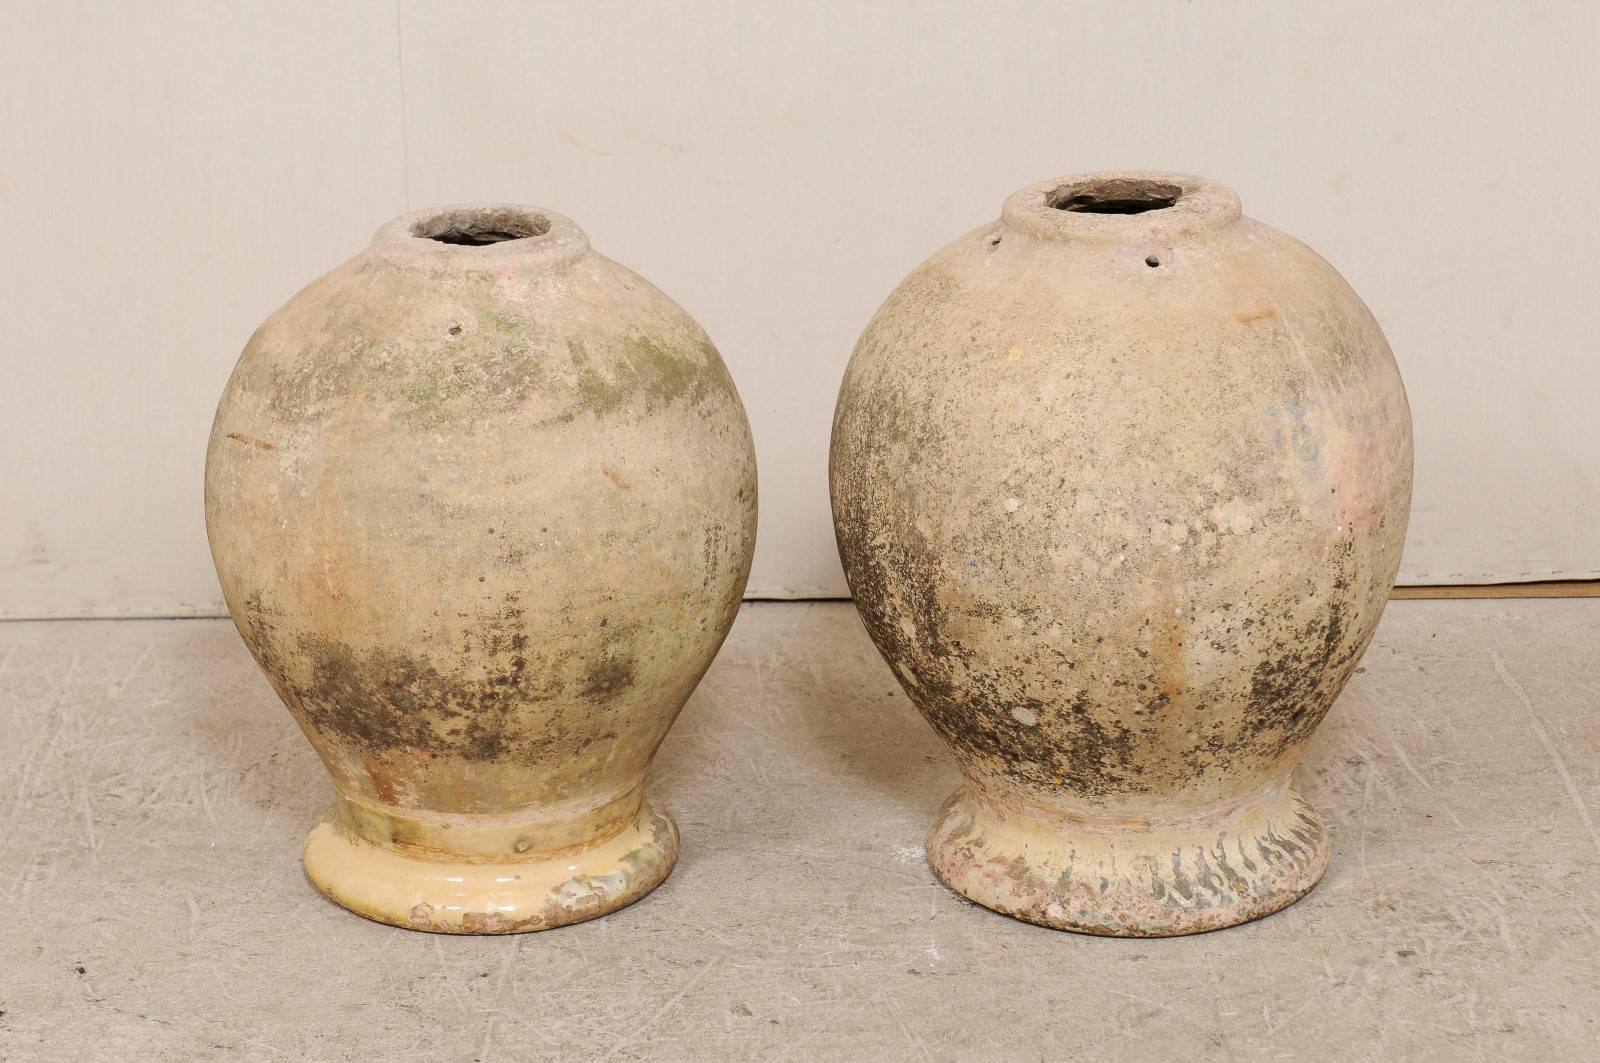 Pair of 19th Century Jars from the Village of Biot, France with Glaze Remains 3